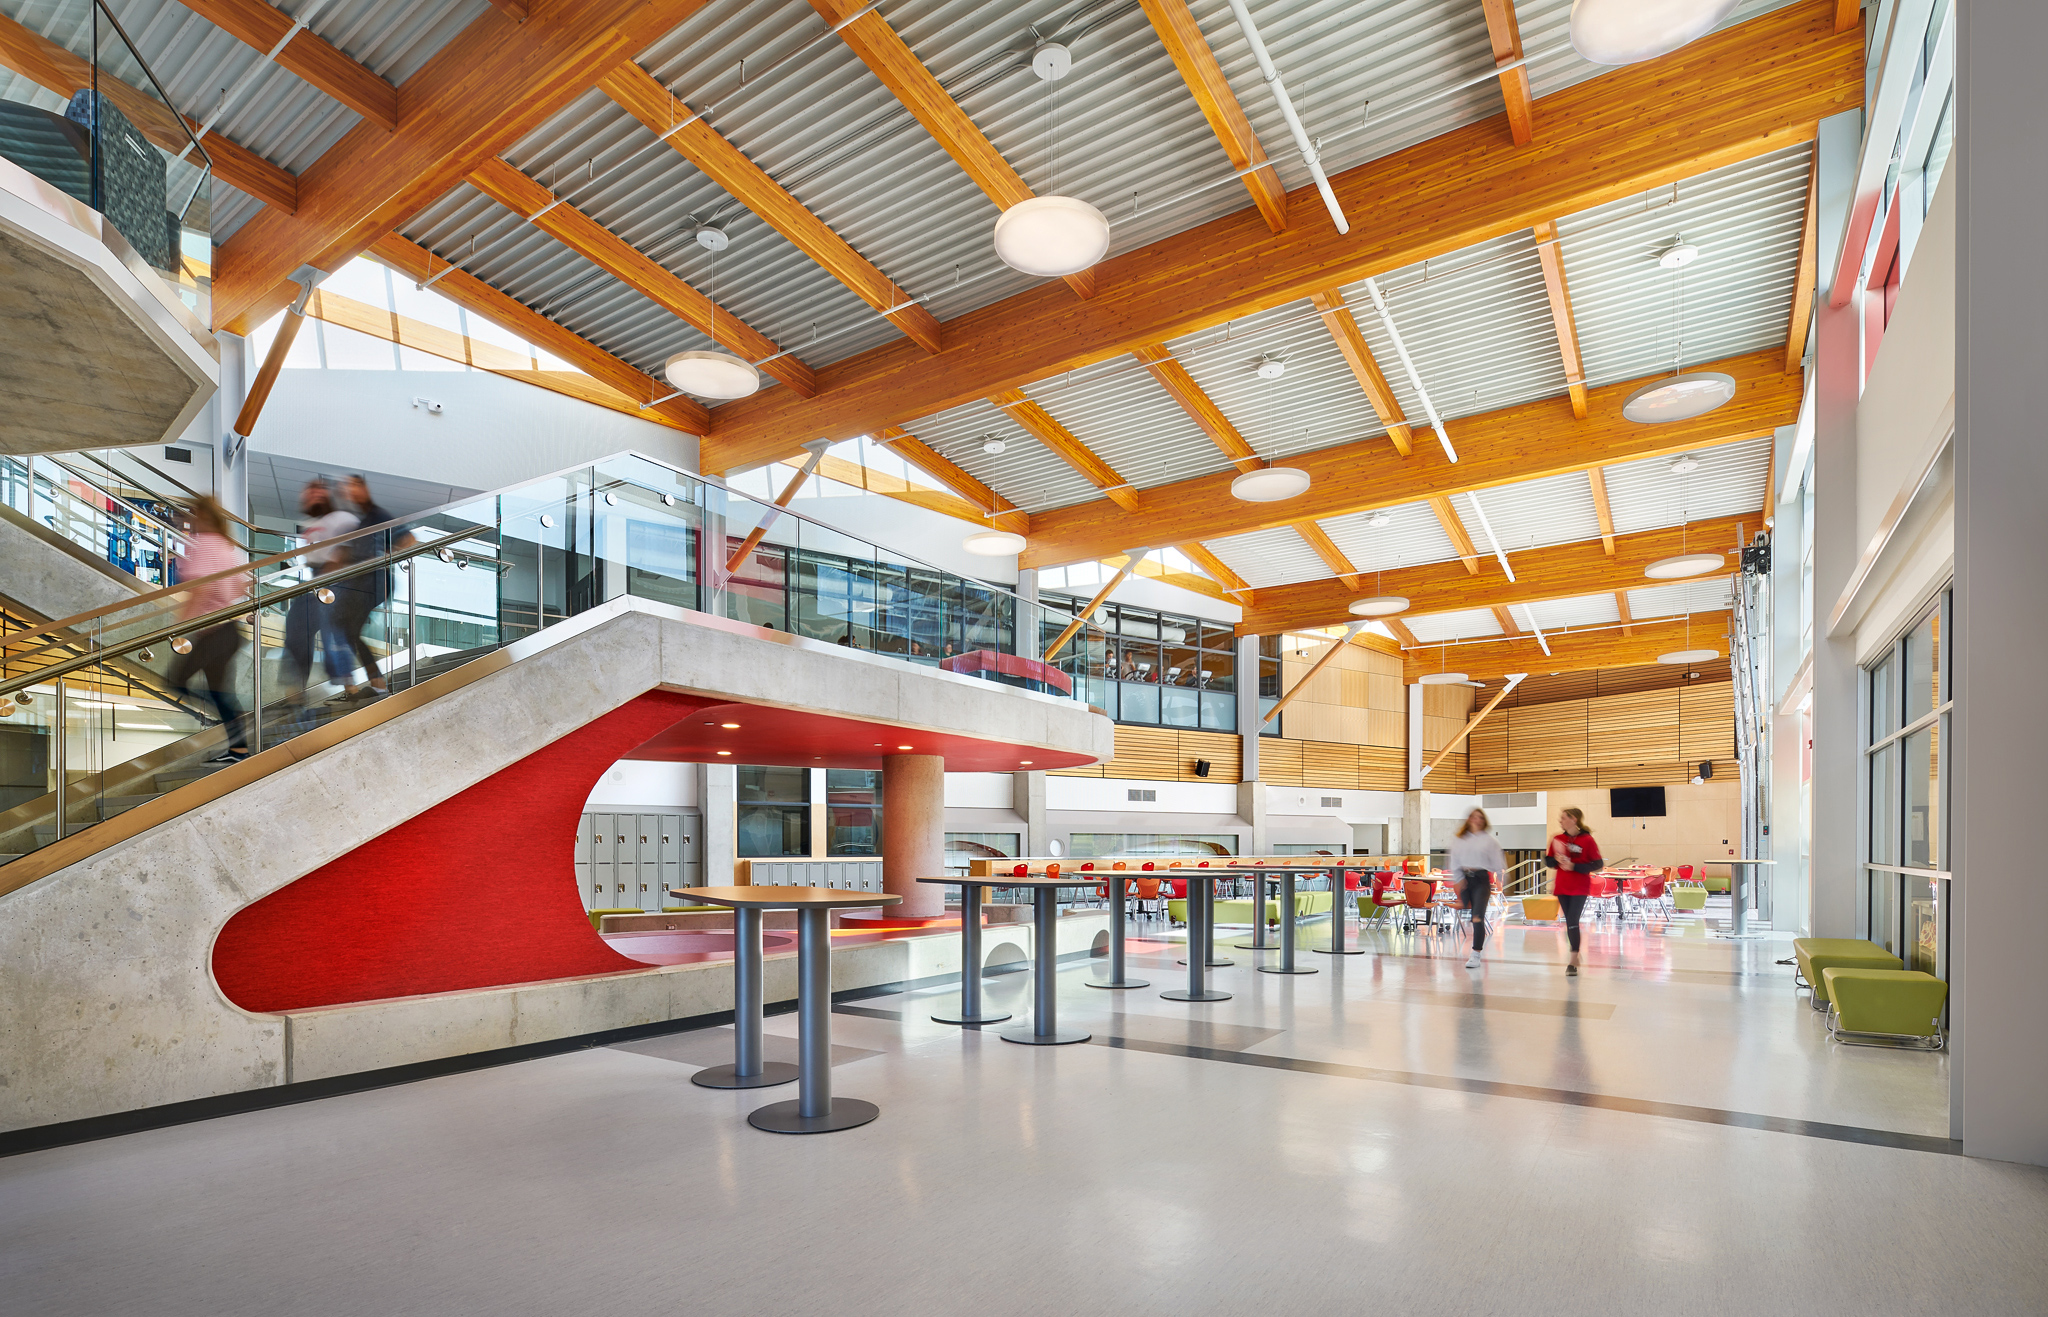 Interior daytime occupied view from ground floor of multi storey École Salish Secondary School showing colorful main atrium with students, tables, and chairs; and glue-laminated timber (glulam) beams above